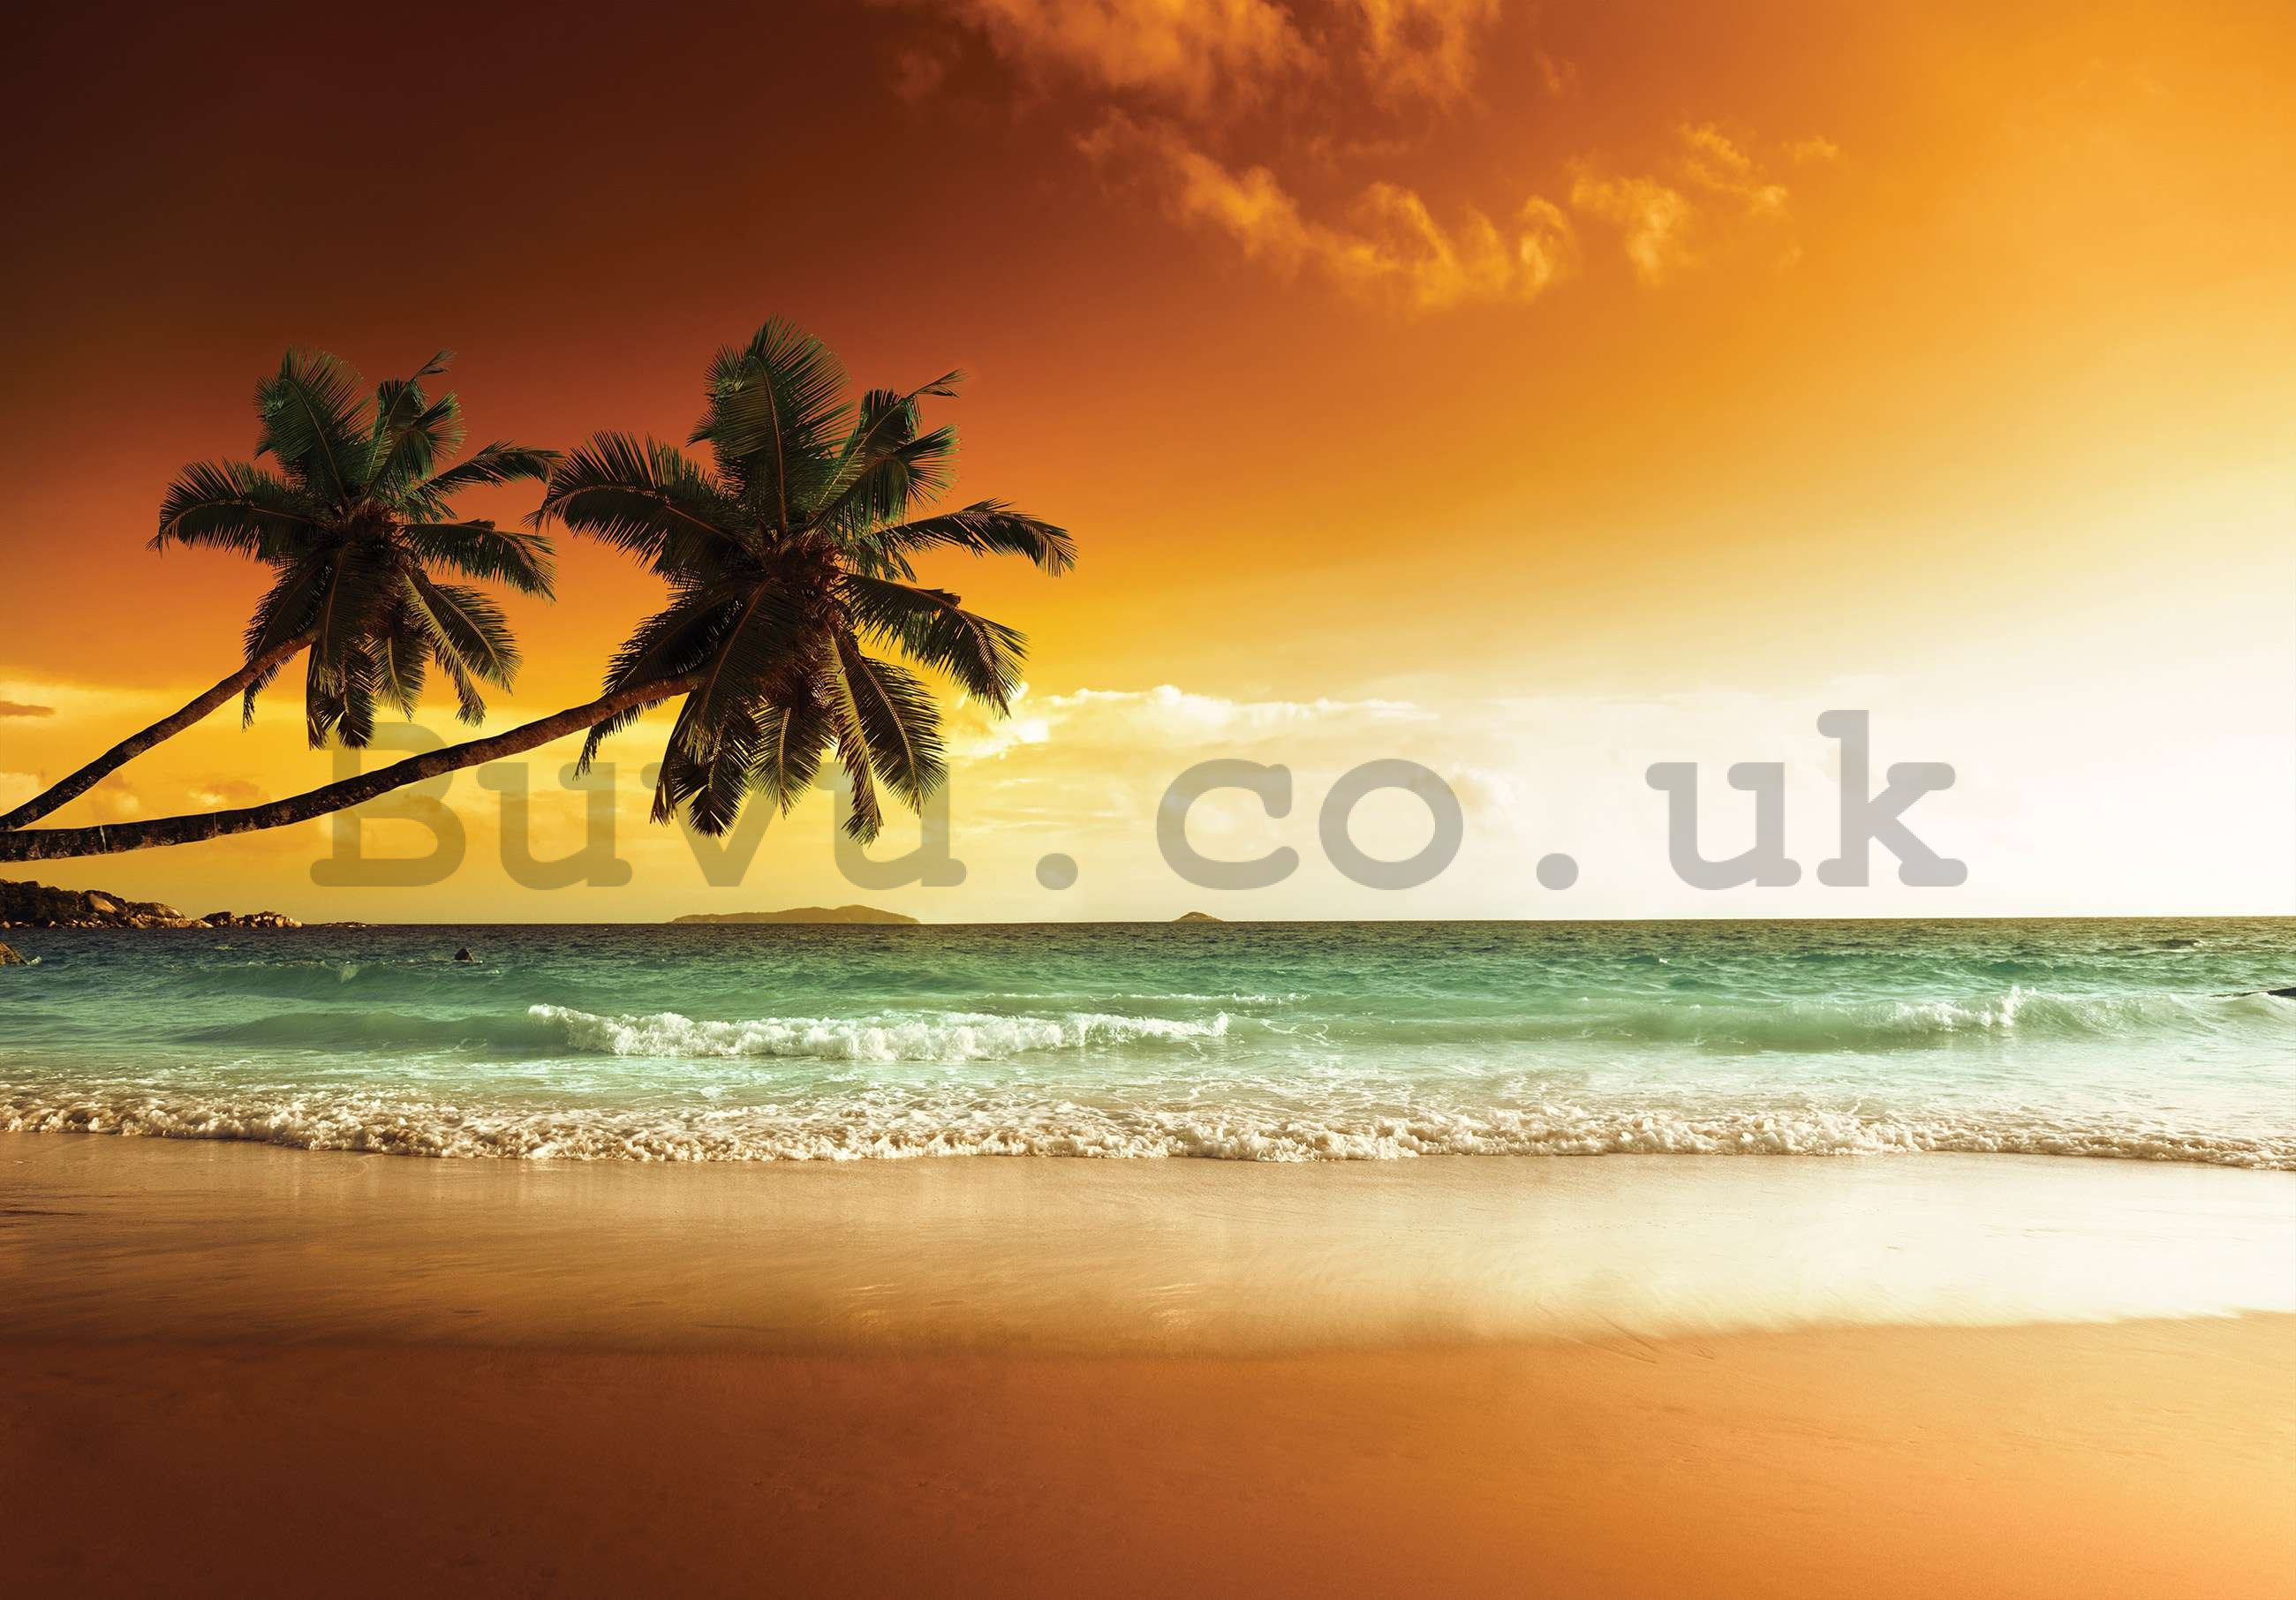 Wall mural vlies: Palm trees and beach at sunset - 152,5x104 cm